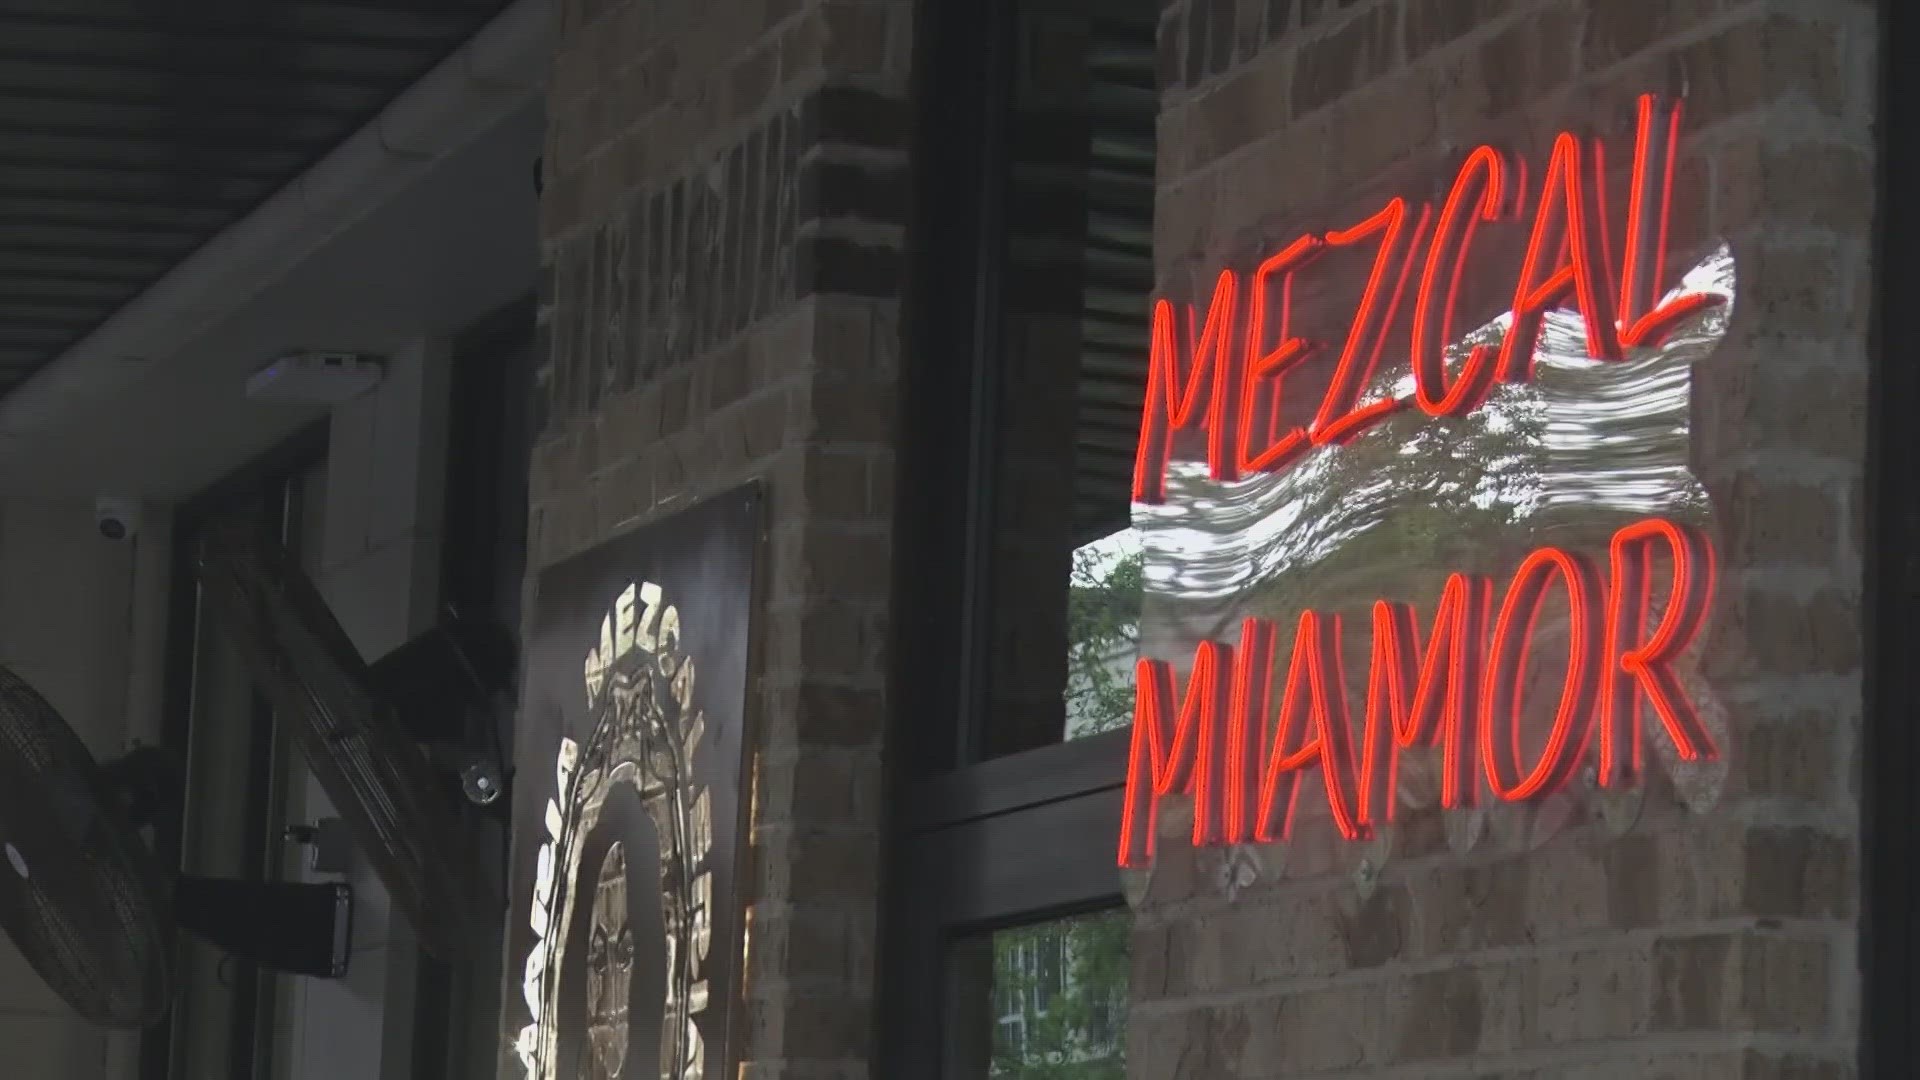 On February 28th, Maria Mezcaleria opened it's doors to bring a mezcal focused restaurant with a modern twist to the city of Waco.